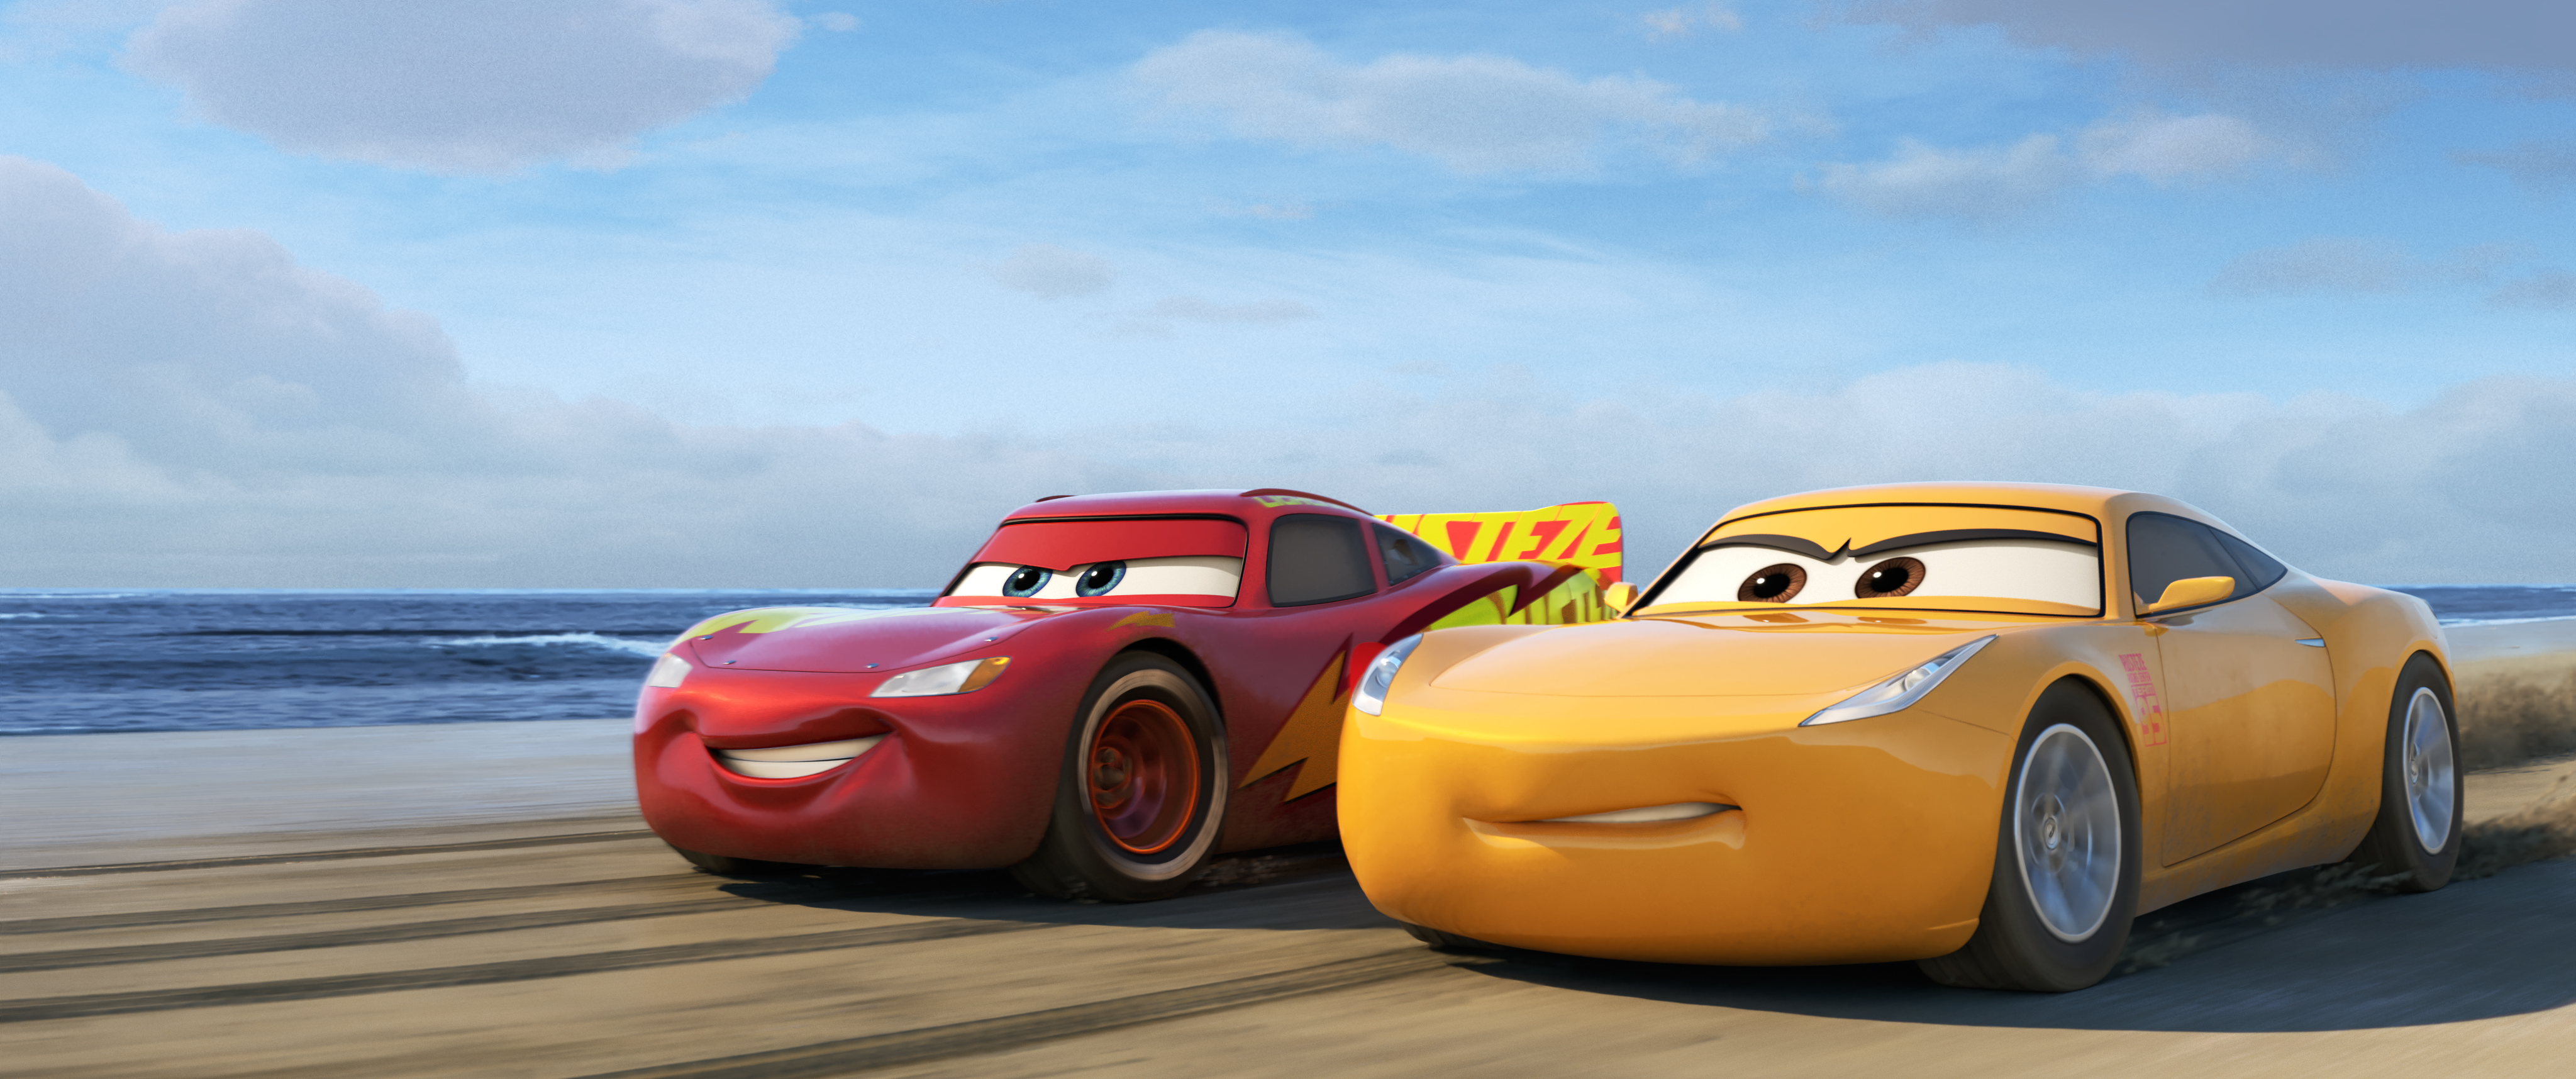 I'm heading to the Disney Pixar Cars 3 and More!